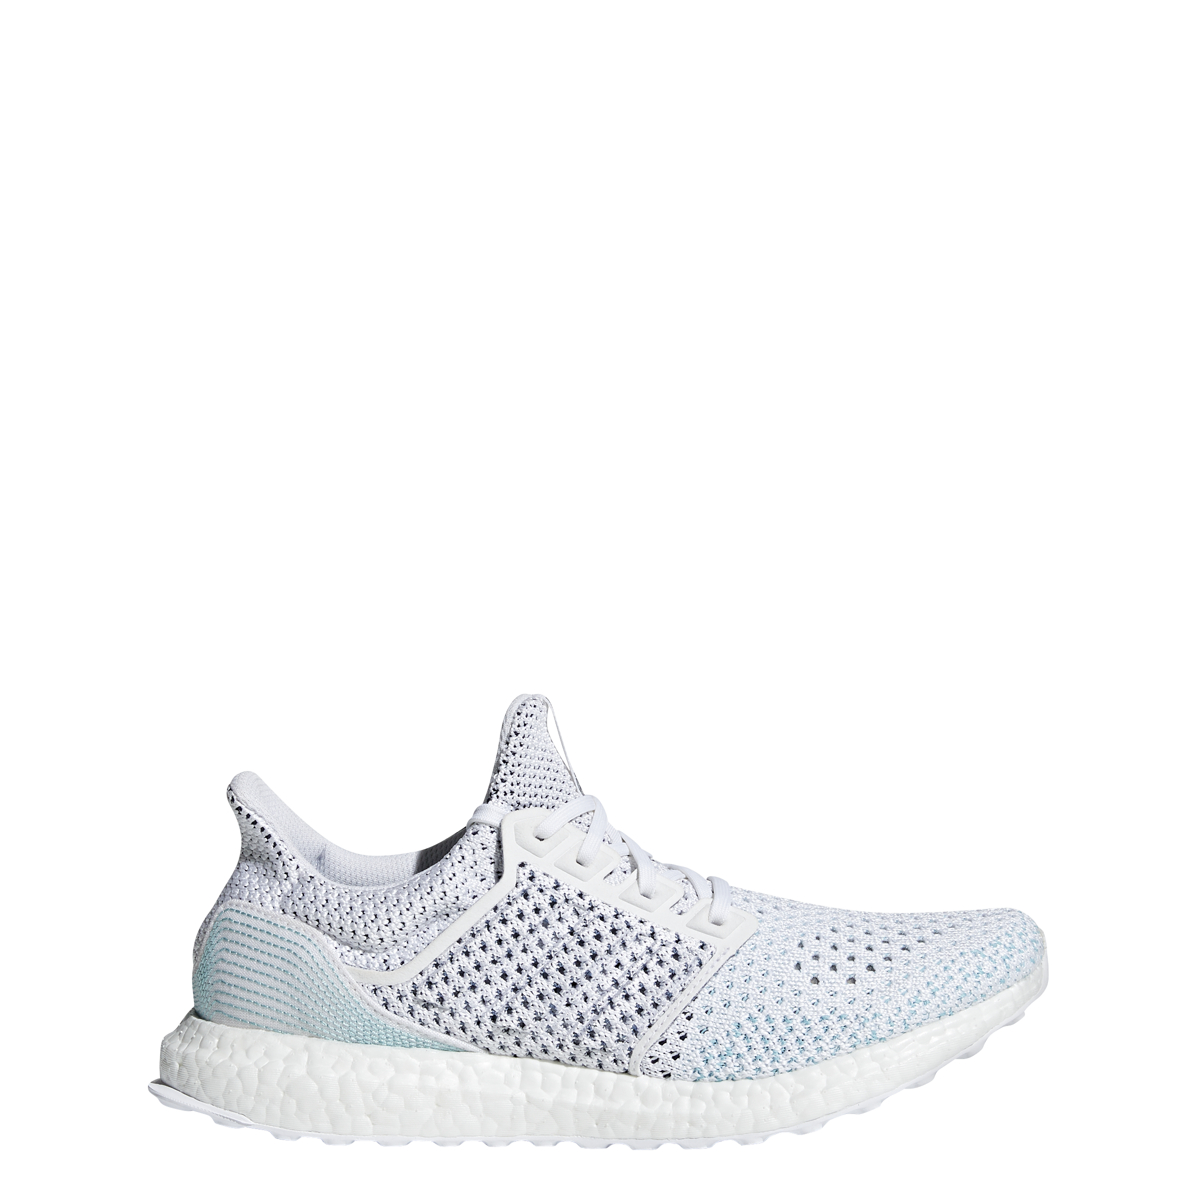 ultra boost parley white